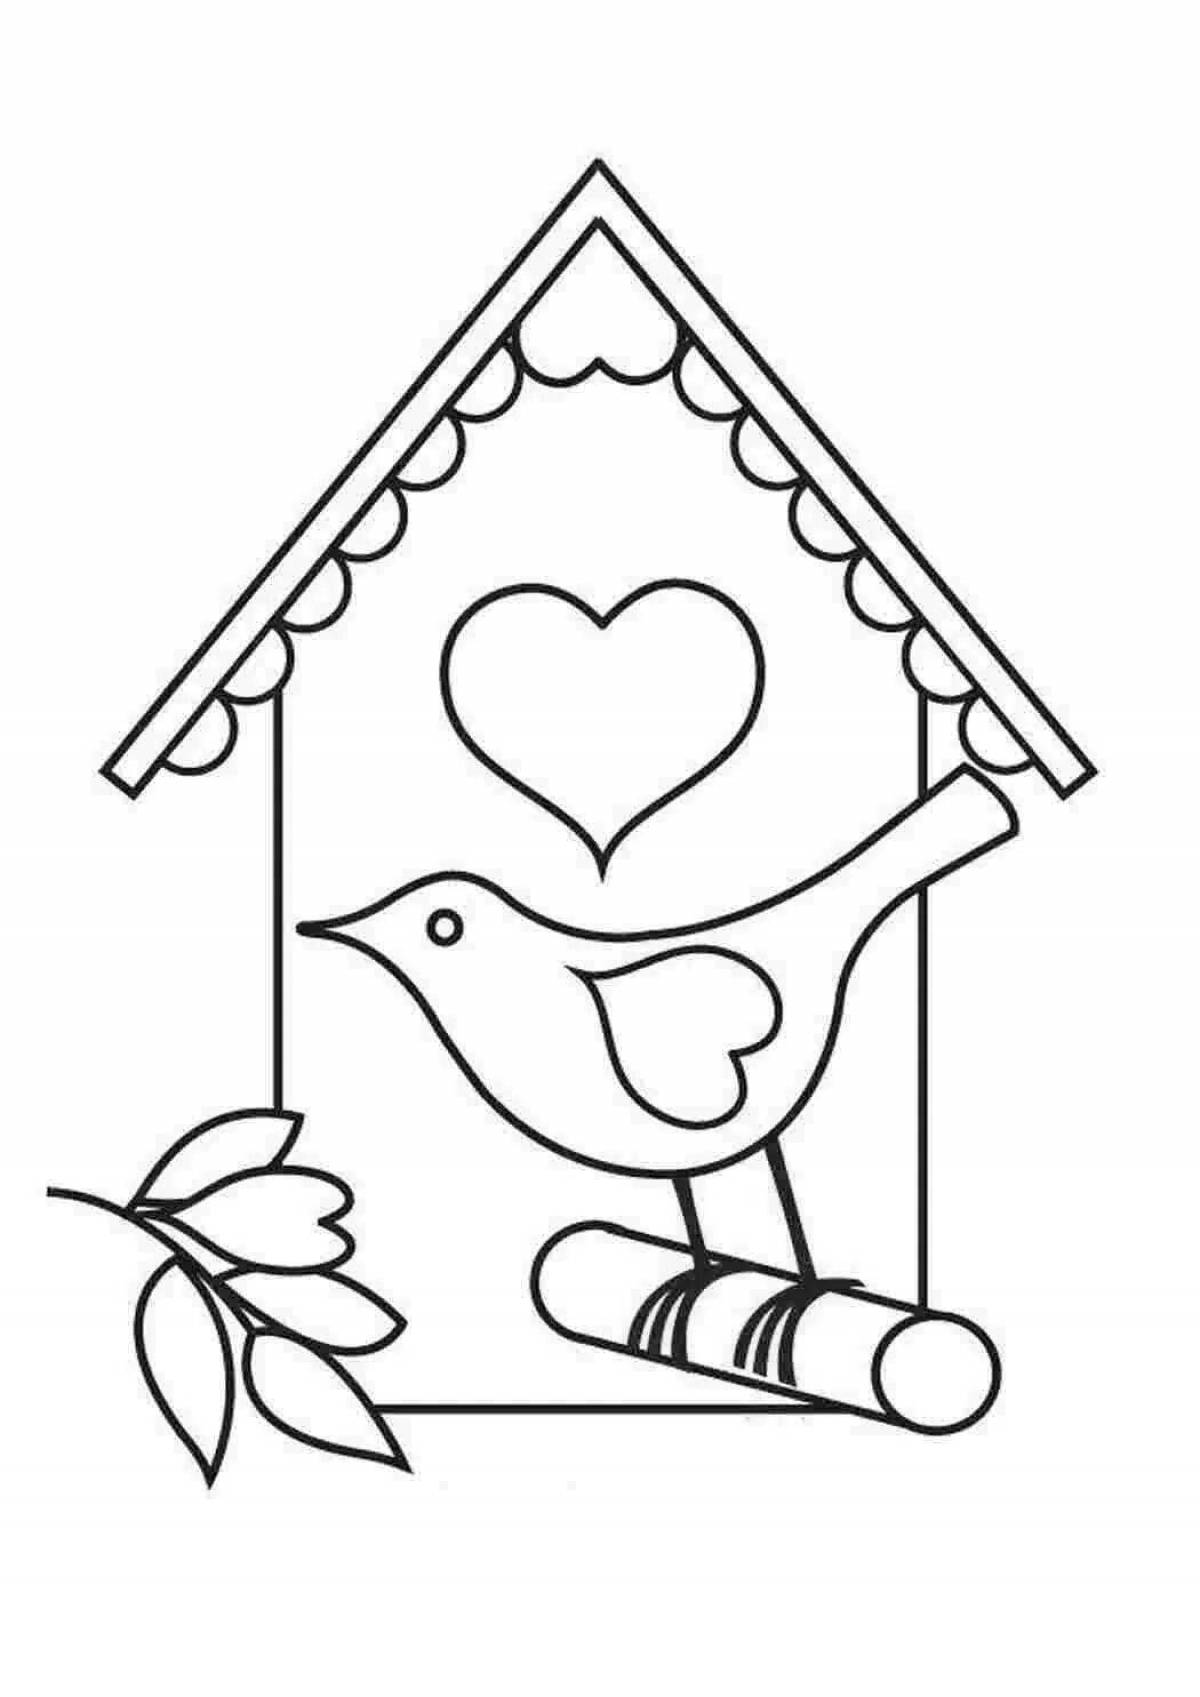 Colorful birdhouse coloring book for kids